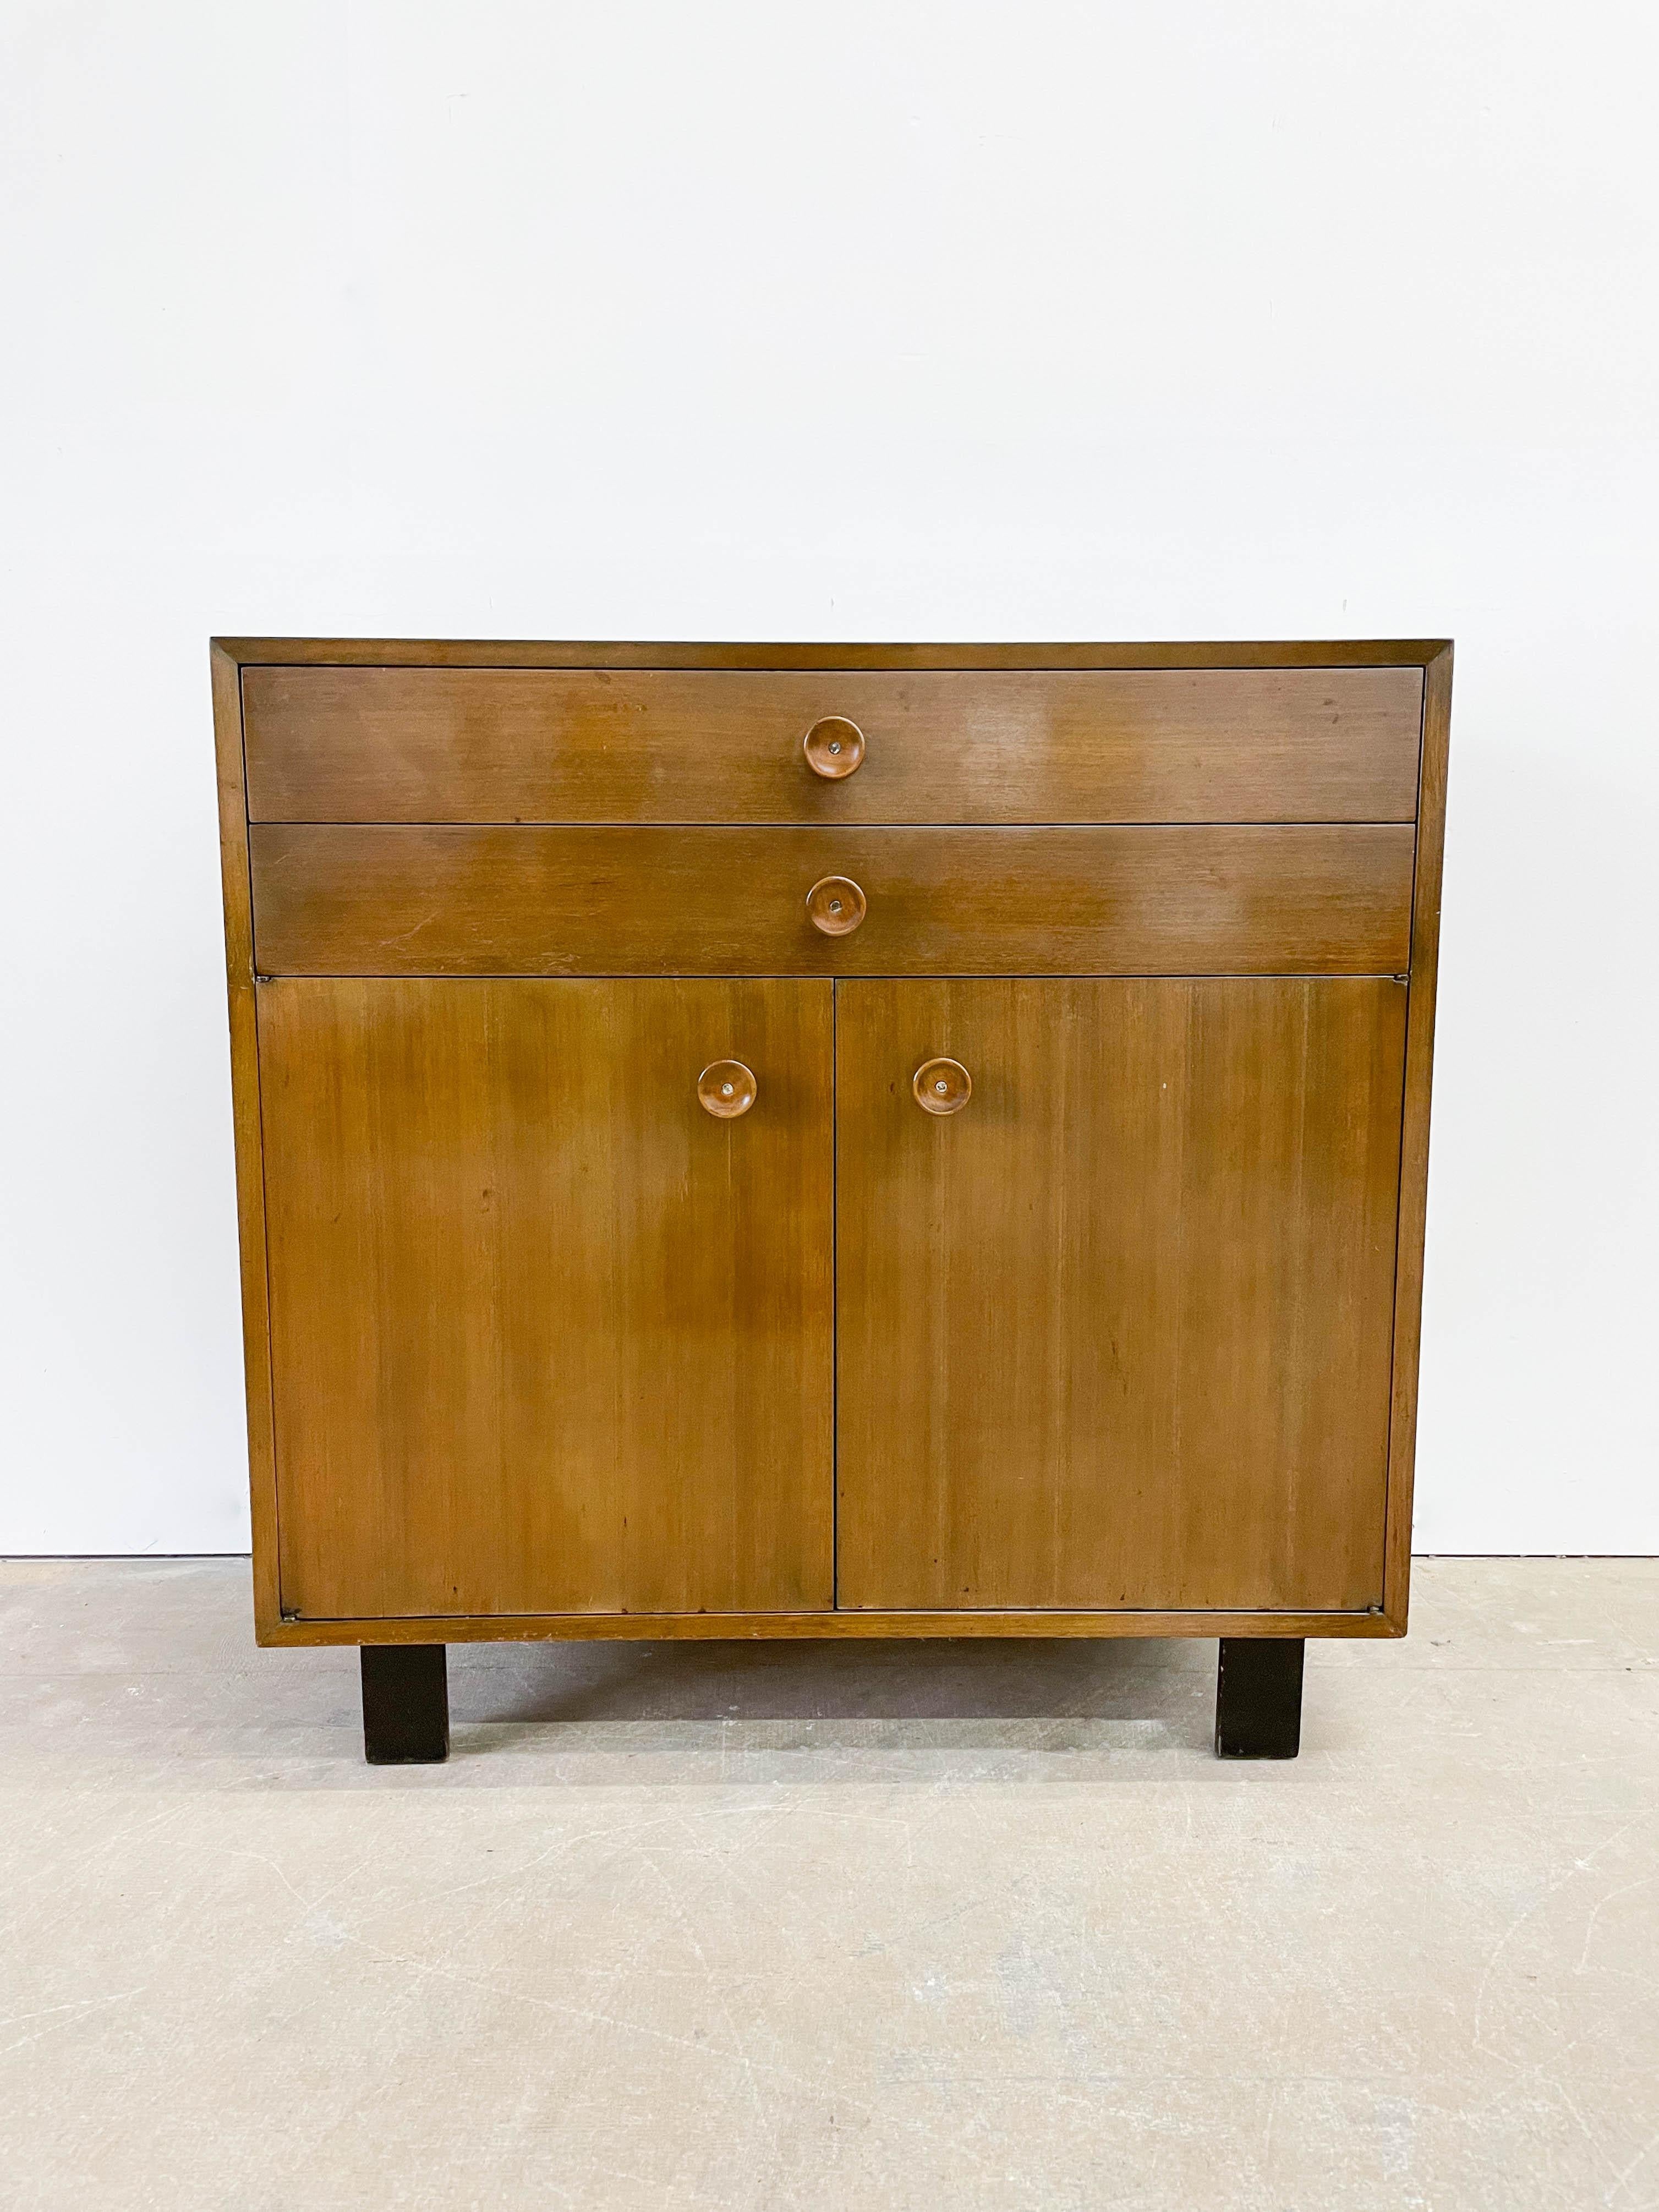 This is a very rare 1940s petite buffet cabinet designed by George Nelson for his first modern collection for Herman Miller in 1948. The buffet cabinet features cupcake pulls and a large storage at the bottom of the cabinet. Two sliding drawers at